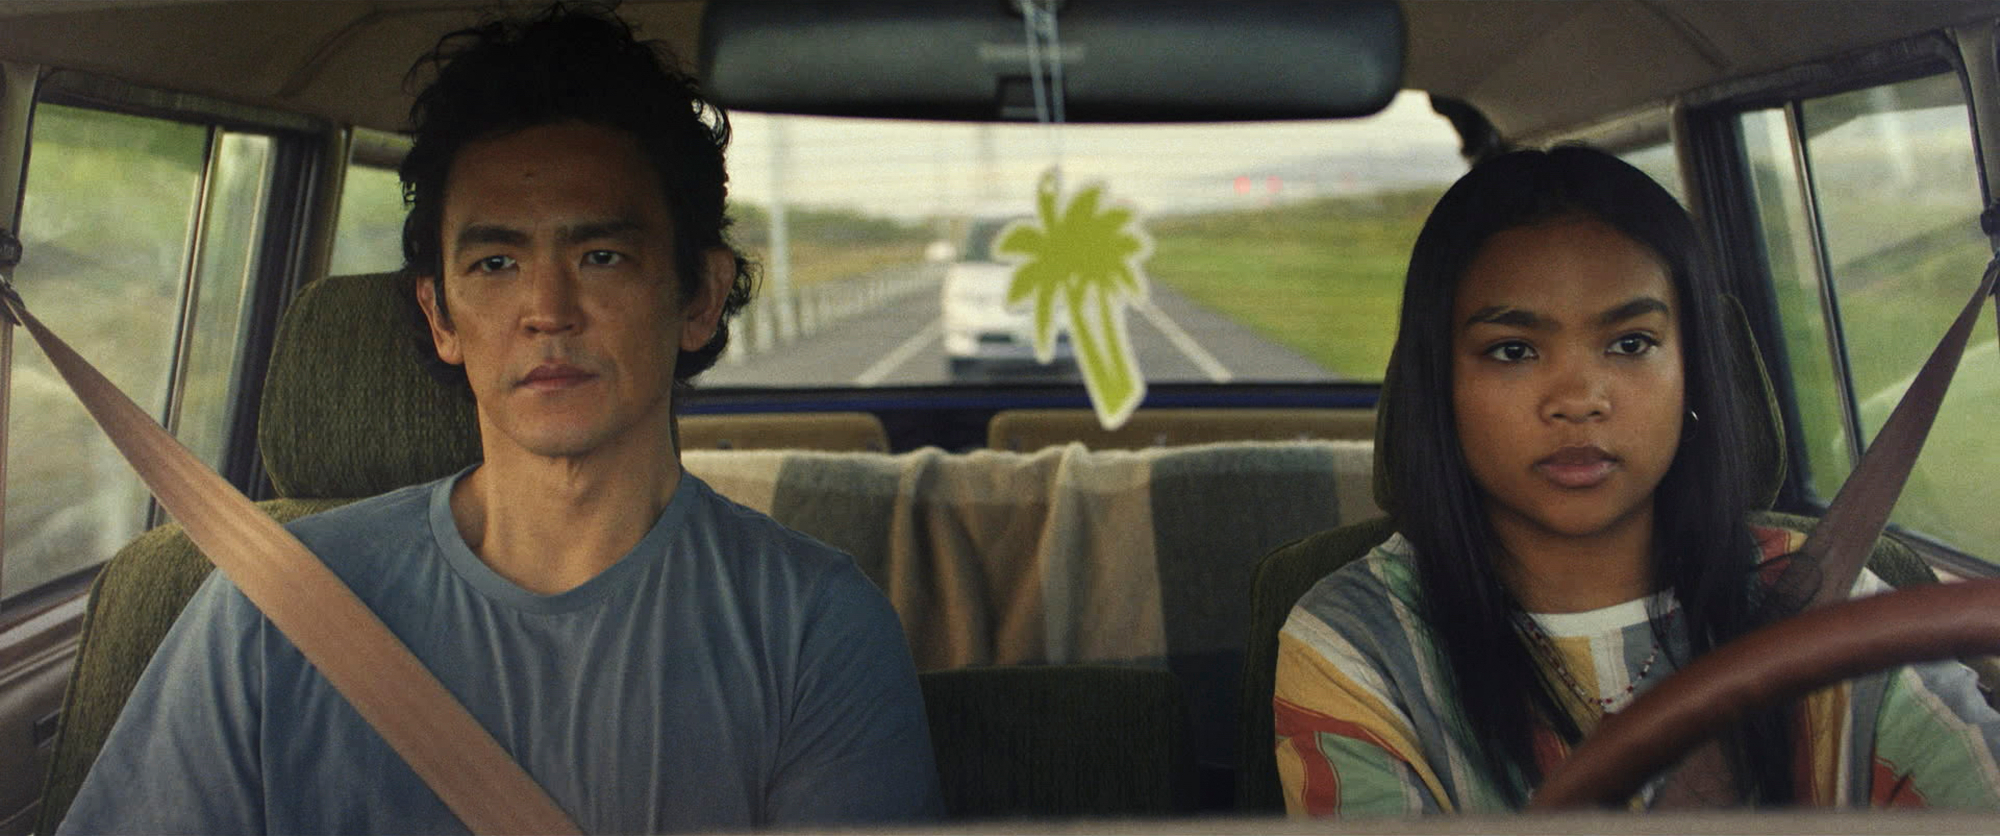 'Don't Make Me Go' John Cho as Max Park and Mia Isaac as Wally Park looking straight ahead in a car wearing their seatbelts